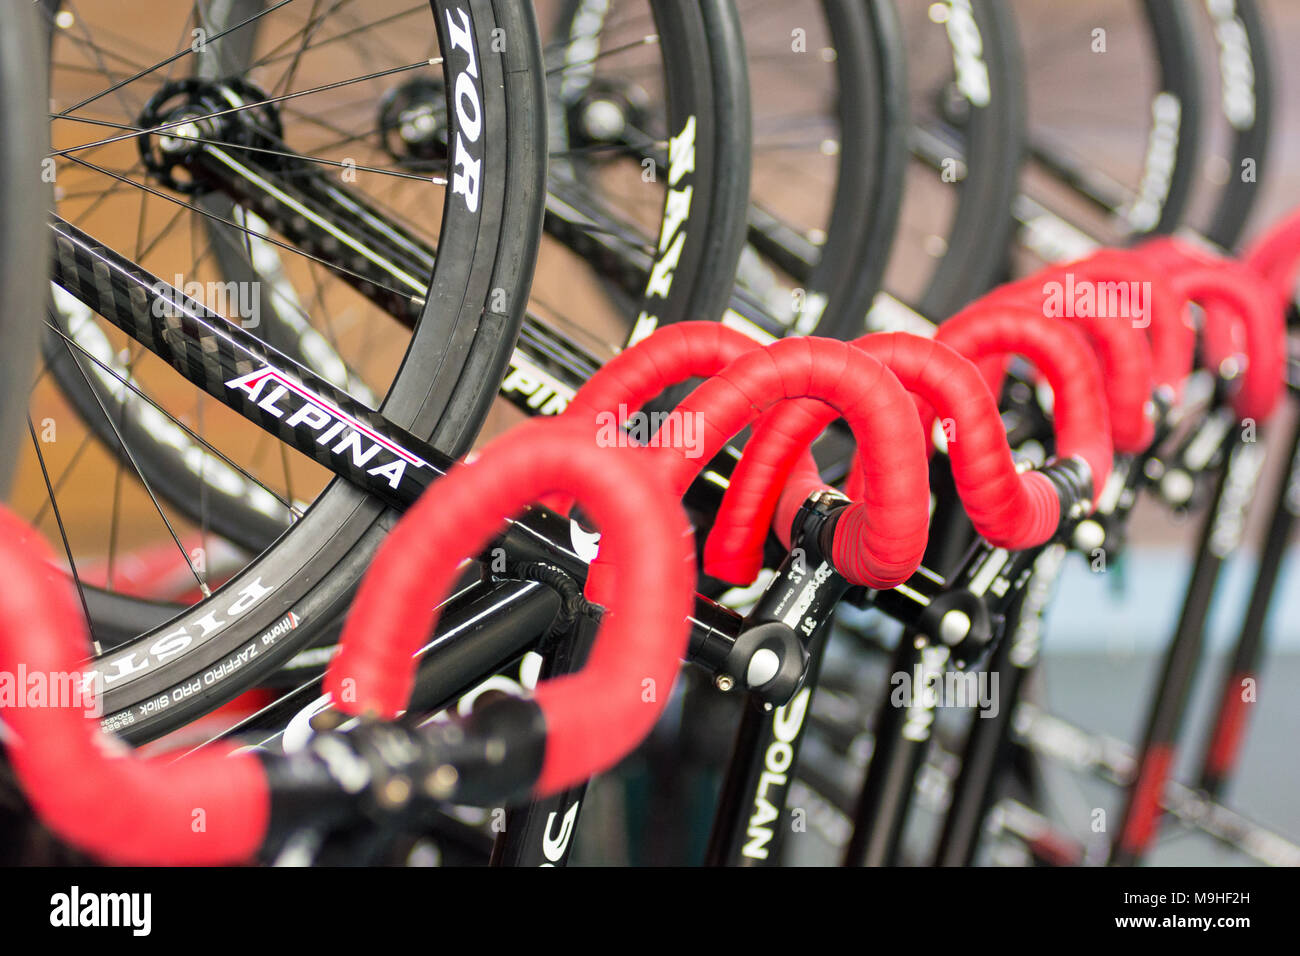 Alpina velodrome racing bicycles with red taped handle bars stacked upright in a row. Stock Photo